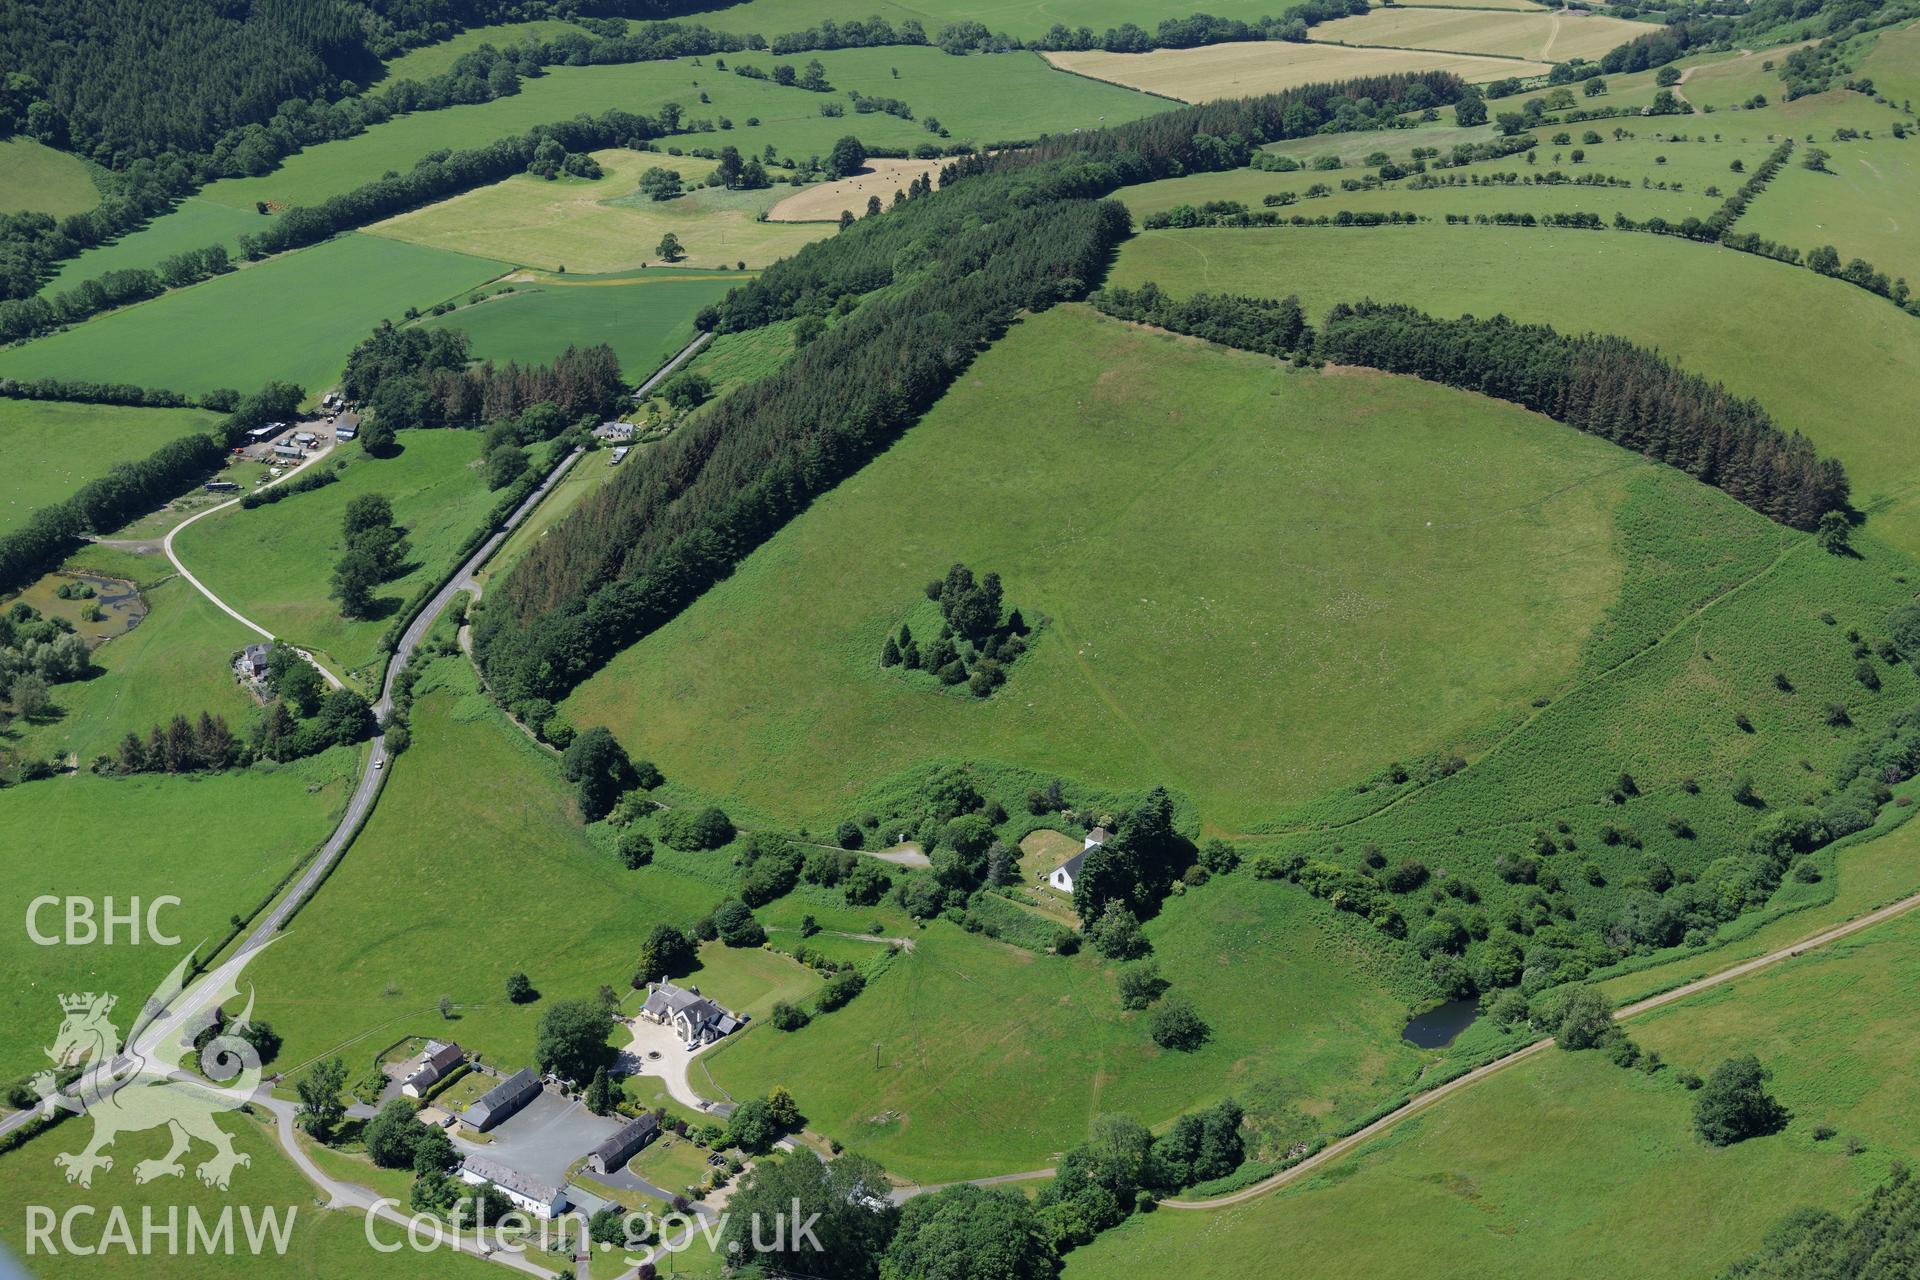 Pilleth Court, including the associated farm complex and buildings. St. Mary's church and the site of the Battle at Bryn Glas is also visible. Oblique aerial photograph taken during the Royal Commission's programme of archaeological aerial reconnaissance by Toby Driver on 30th June 2015.